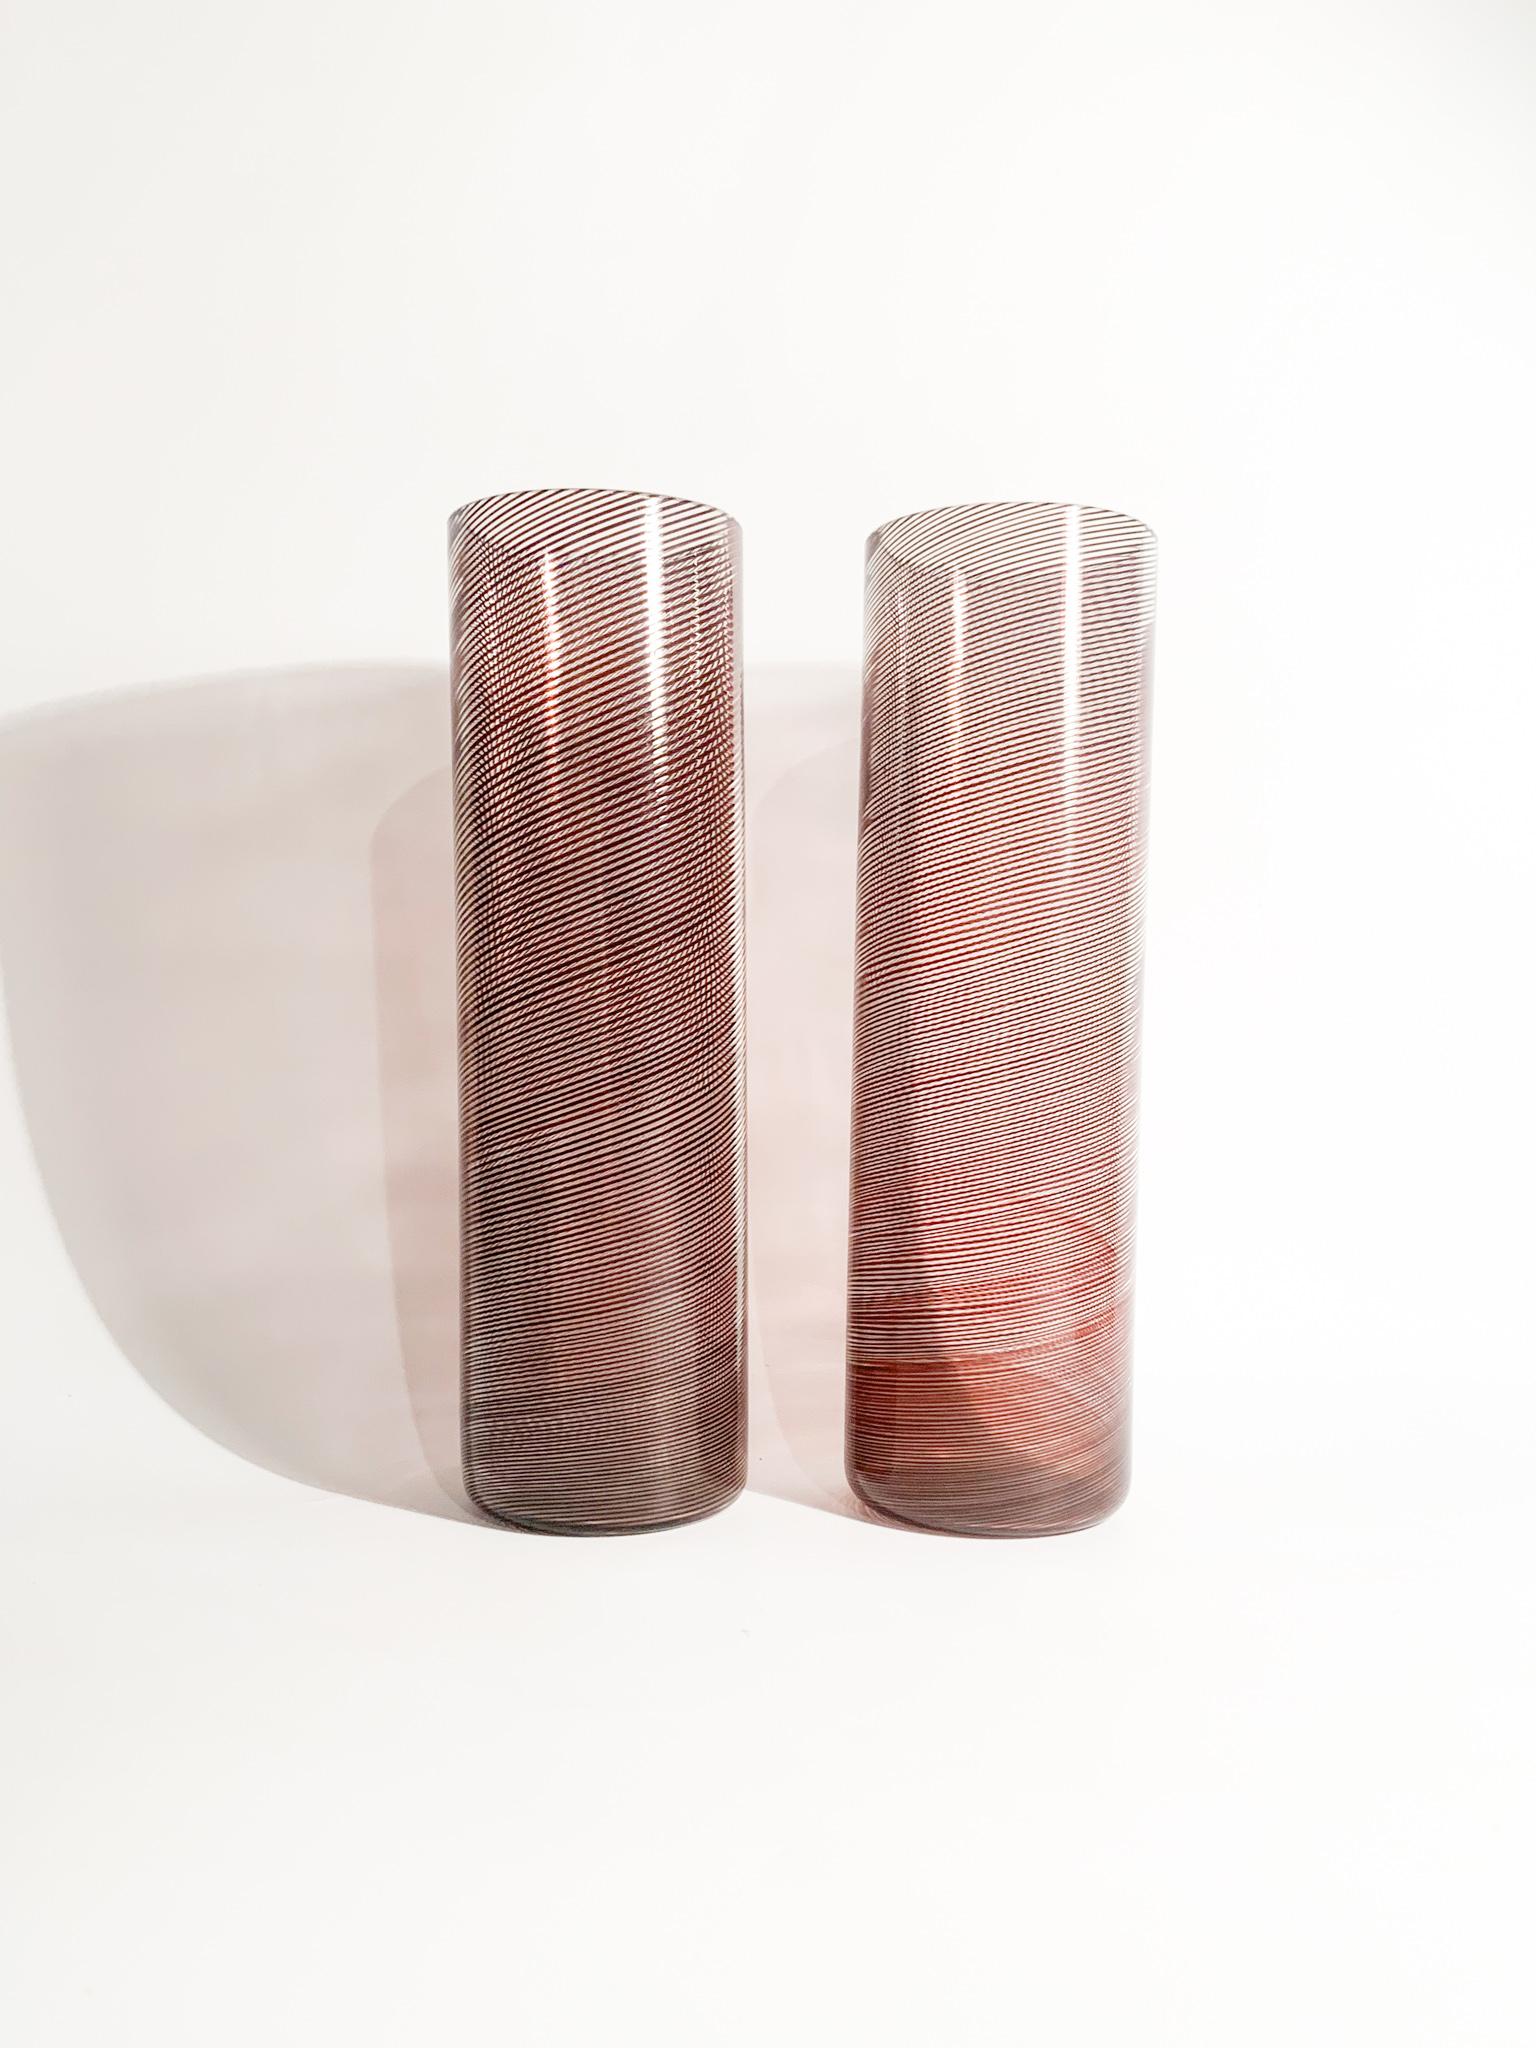 Pair of vases with a cylindrical shape, with spiral filigree workmanship, designed by Tapio Wirkkala and made by Venini in the 1970s.

Ø cm 8 h cm 27

Tapio Veli Ilmari Wirkkala (Hanko, 2 June 1915 – Helsinki, 19 May 1985) was a Finnish designer and